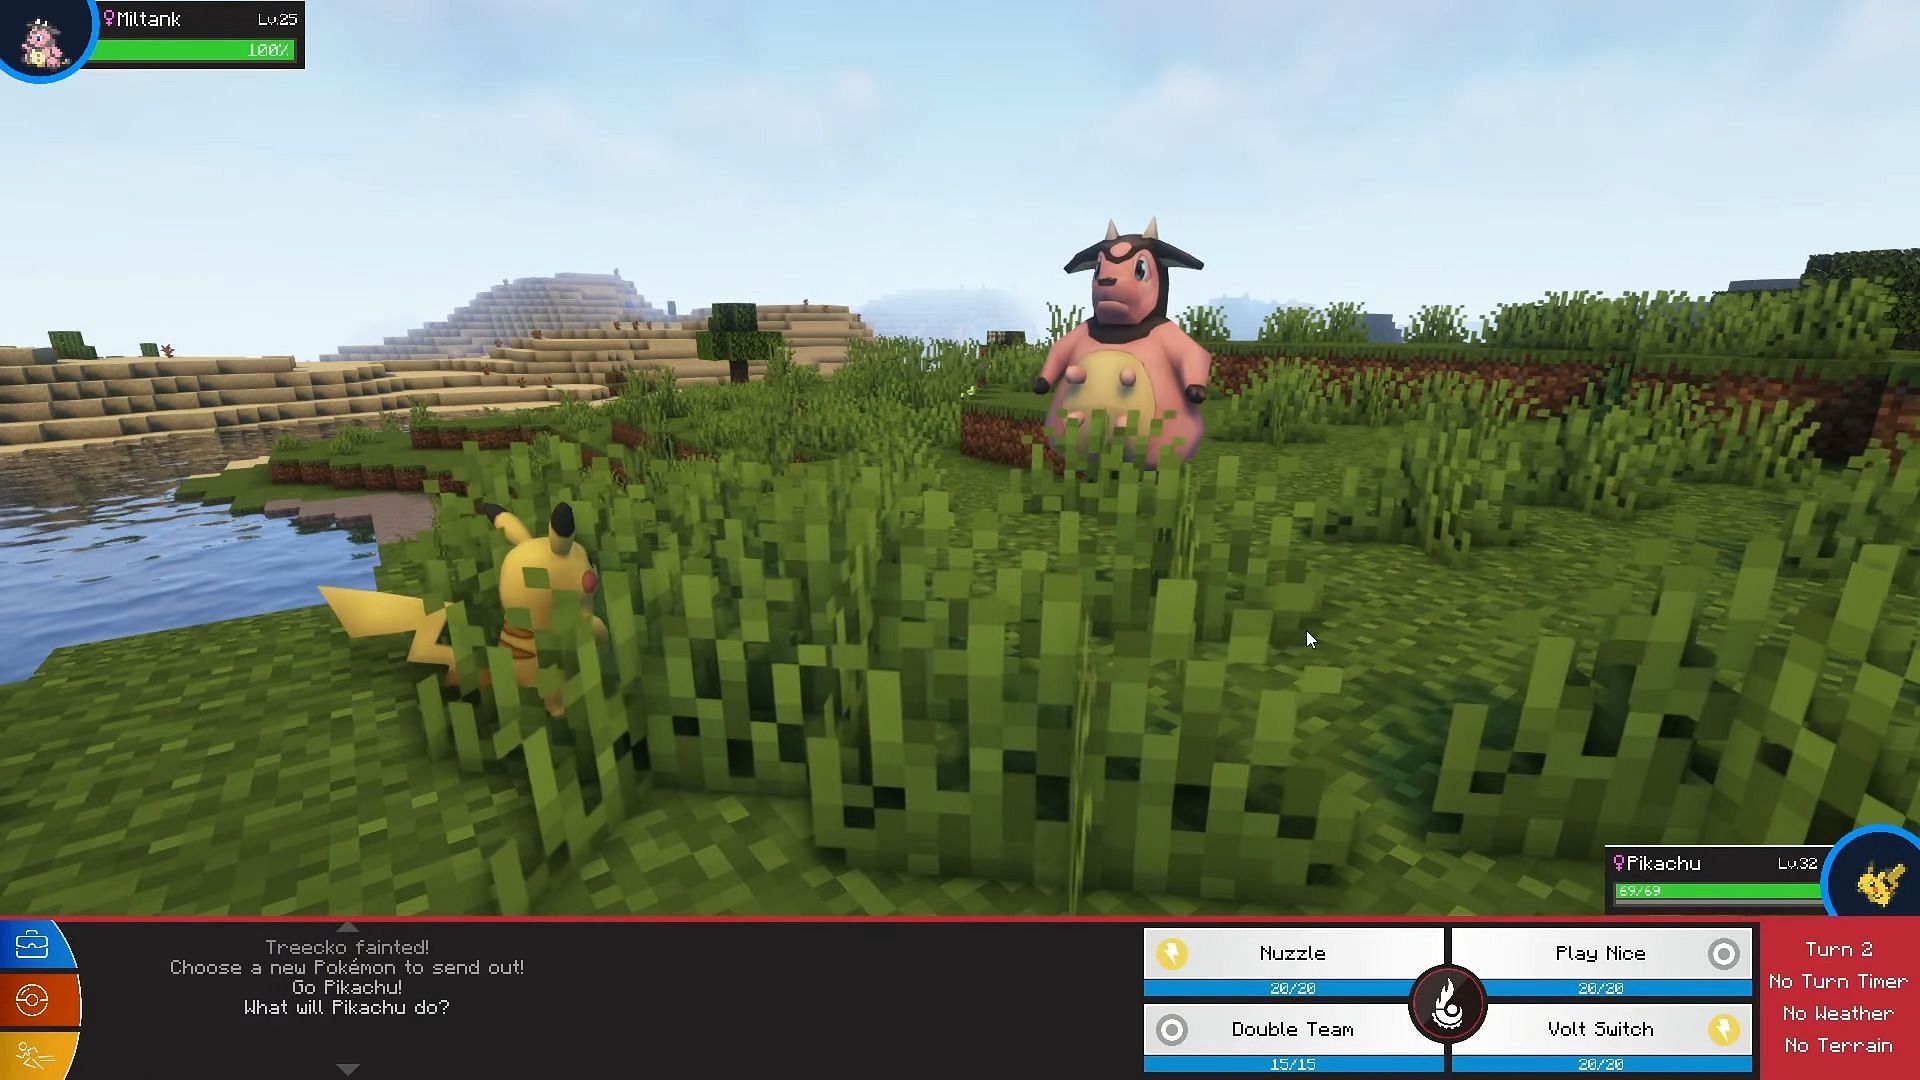 Pikachu and Miltank face off in a Pokemon battle in the Pixelmon mod (Image via PixelSnax/YouTube)